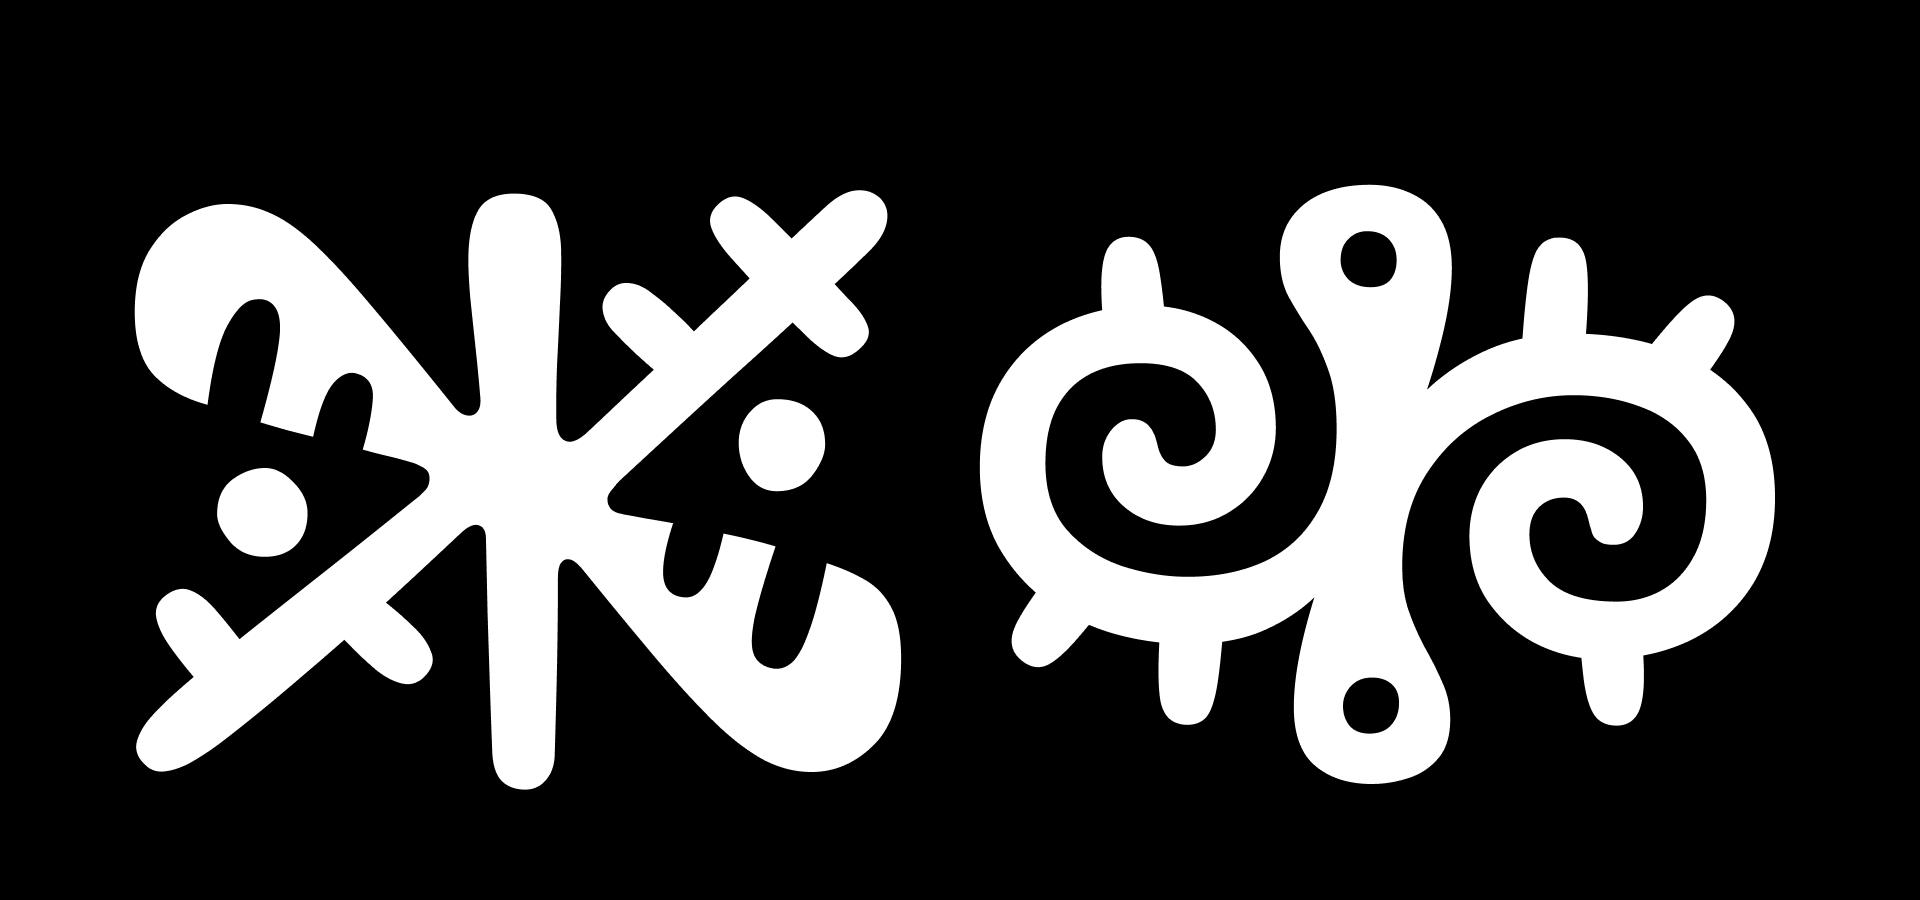 Two Cyrillic characters that appear to have eyes and other animal-like features